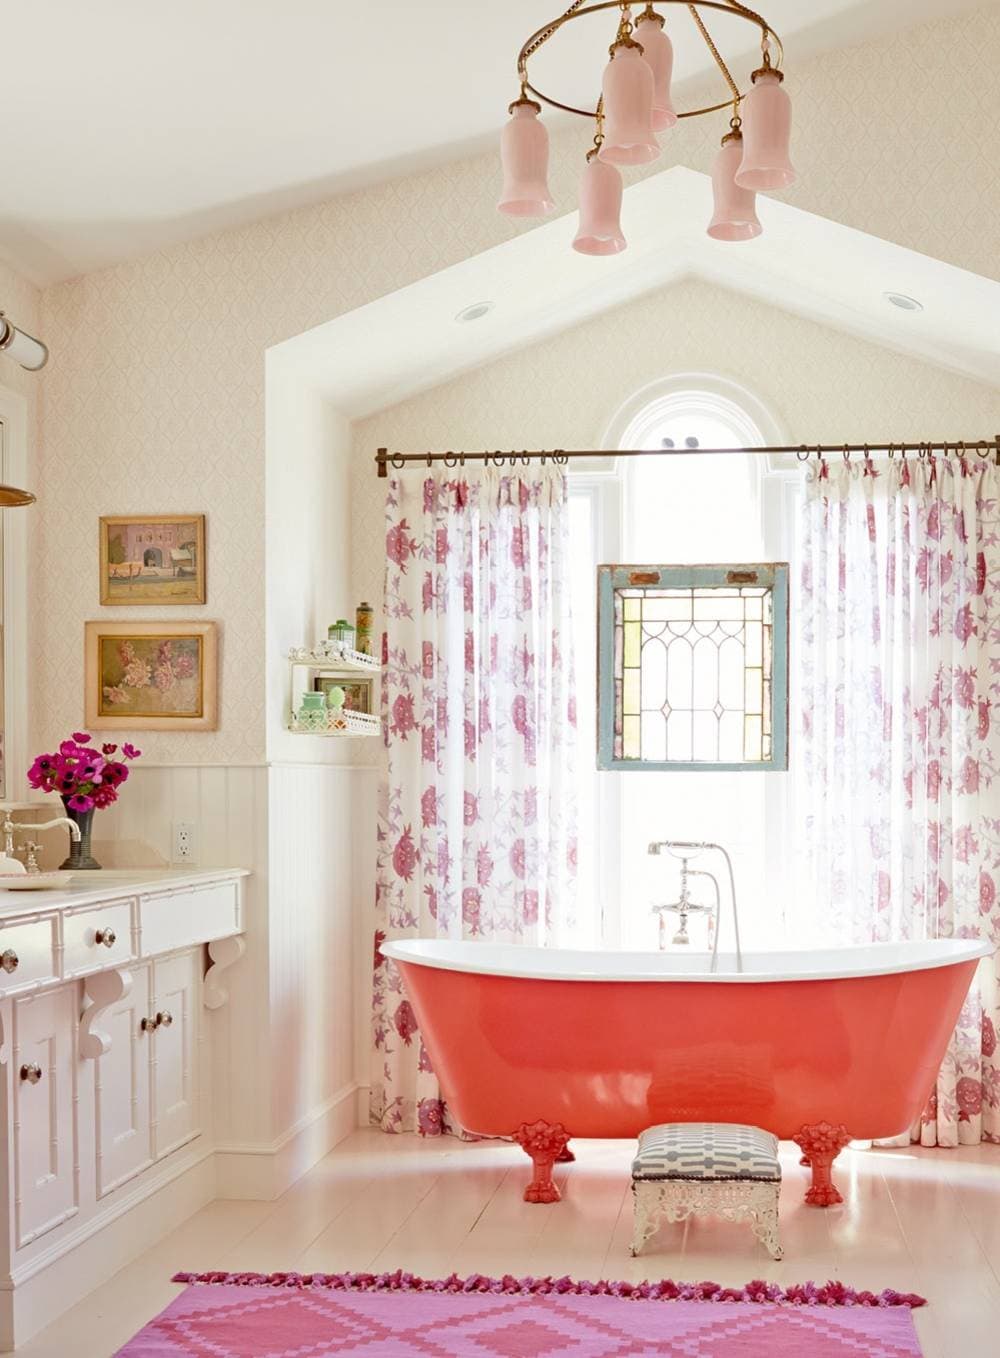 Bathroom in beach english cottage style featuring red bathtub and pink accents